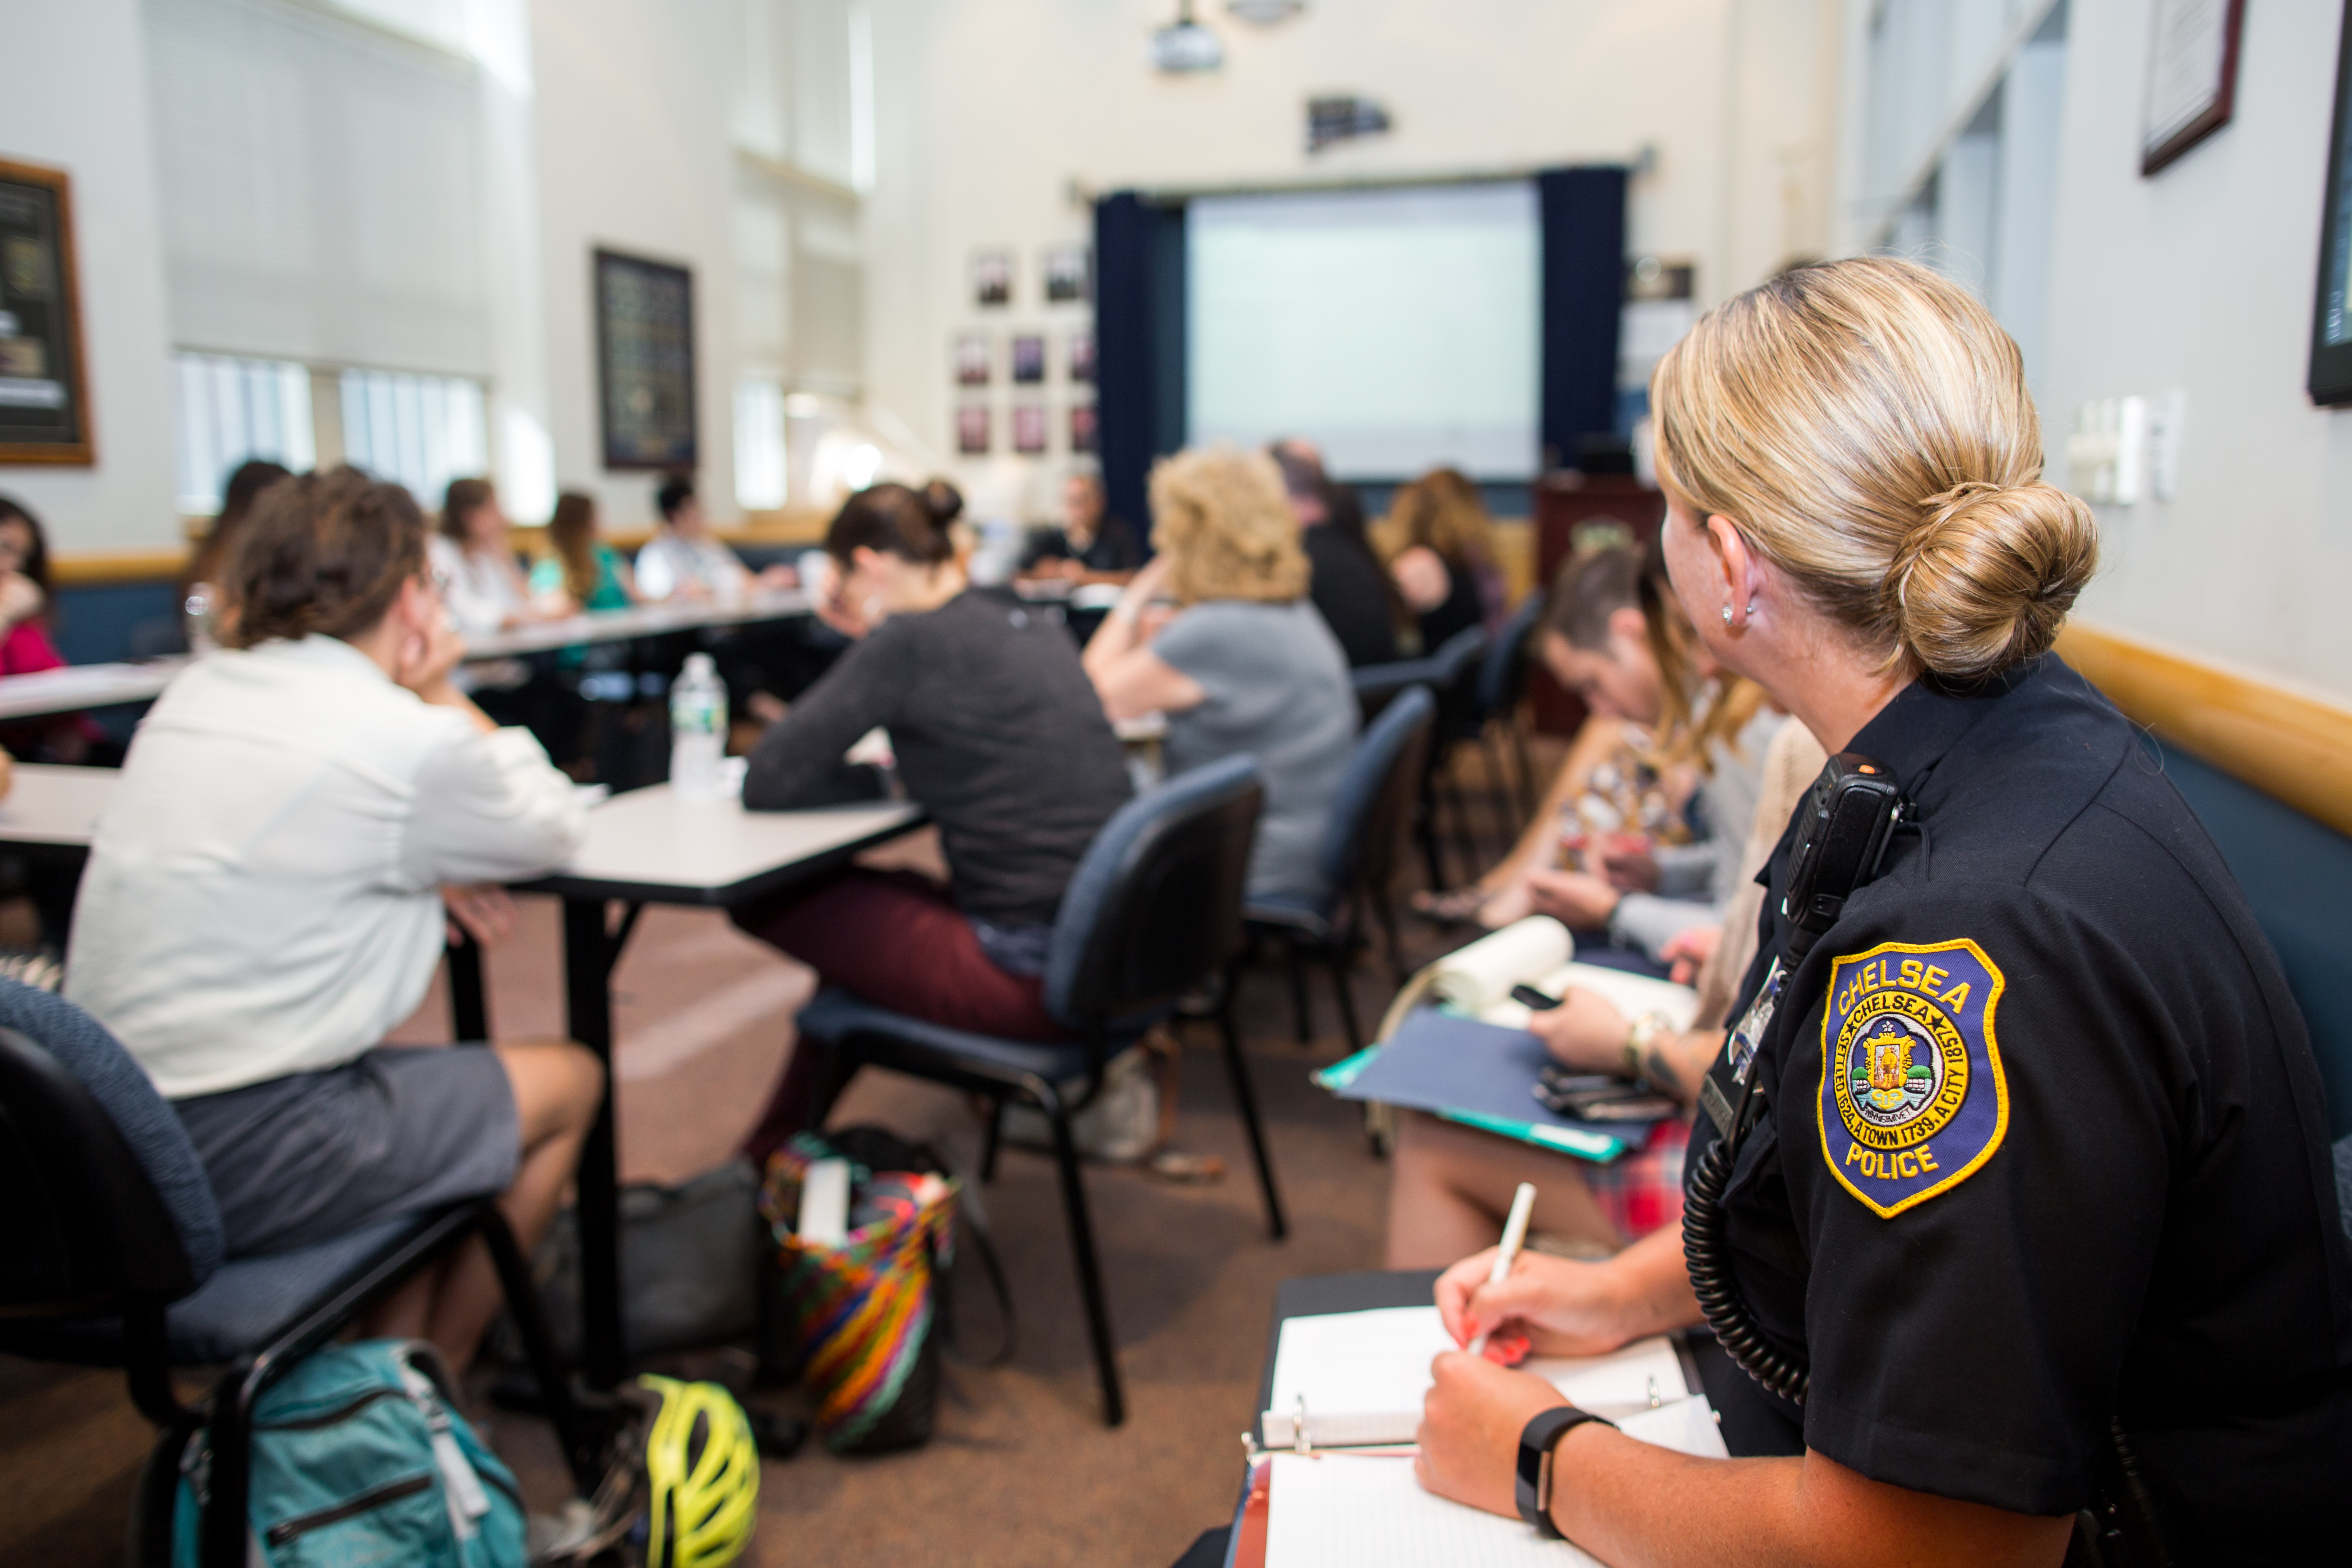 A police officer sits in a classroom